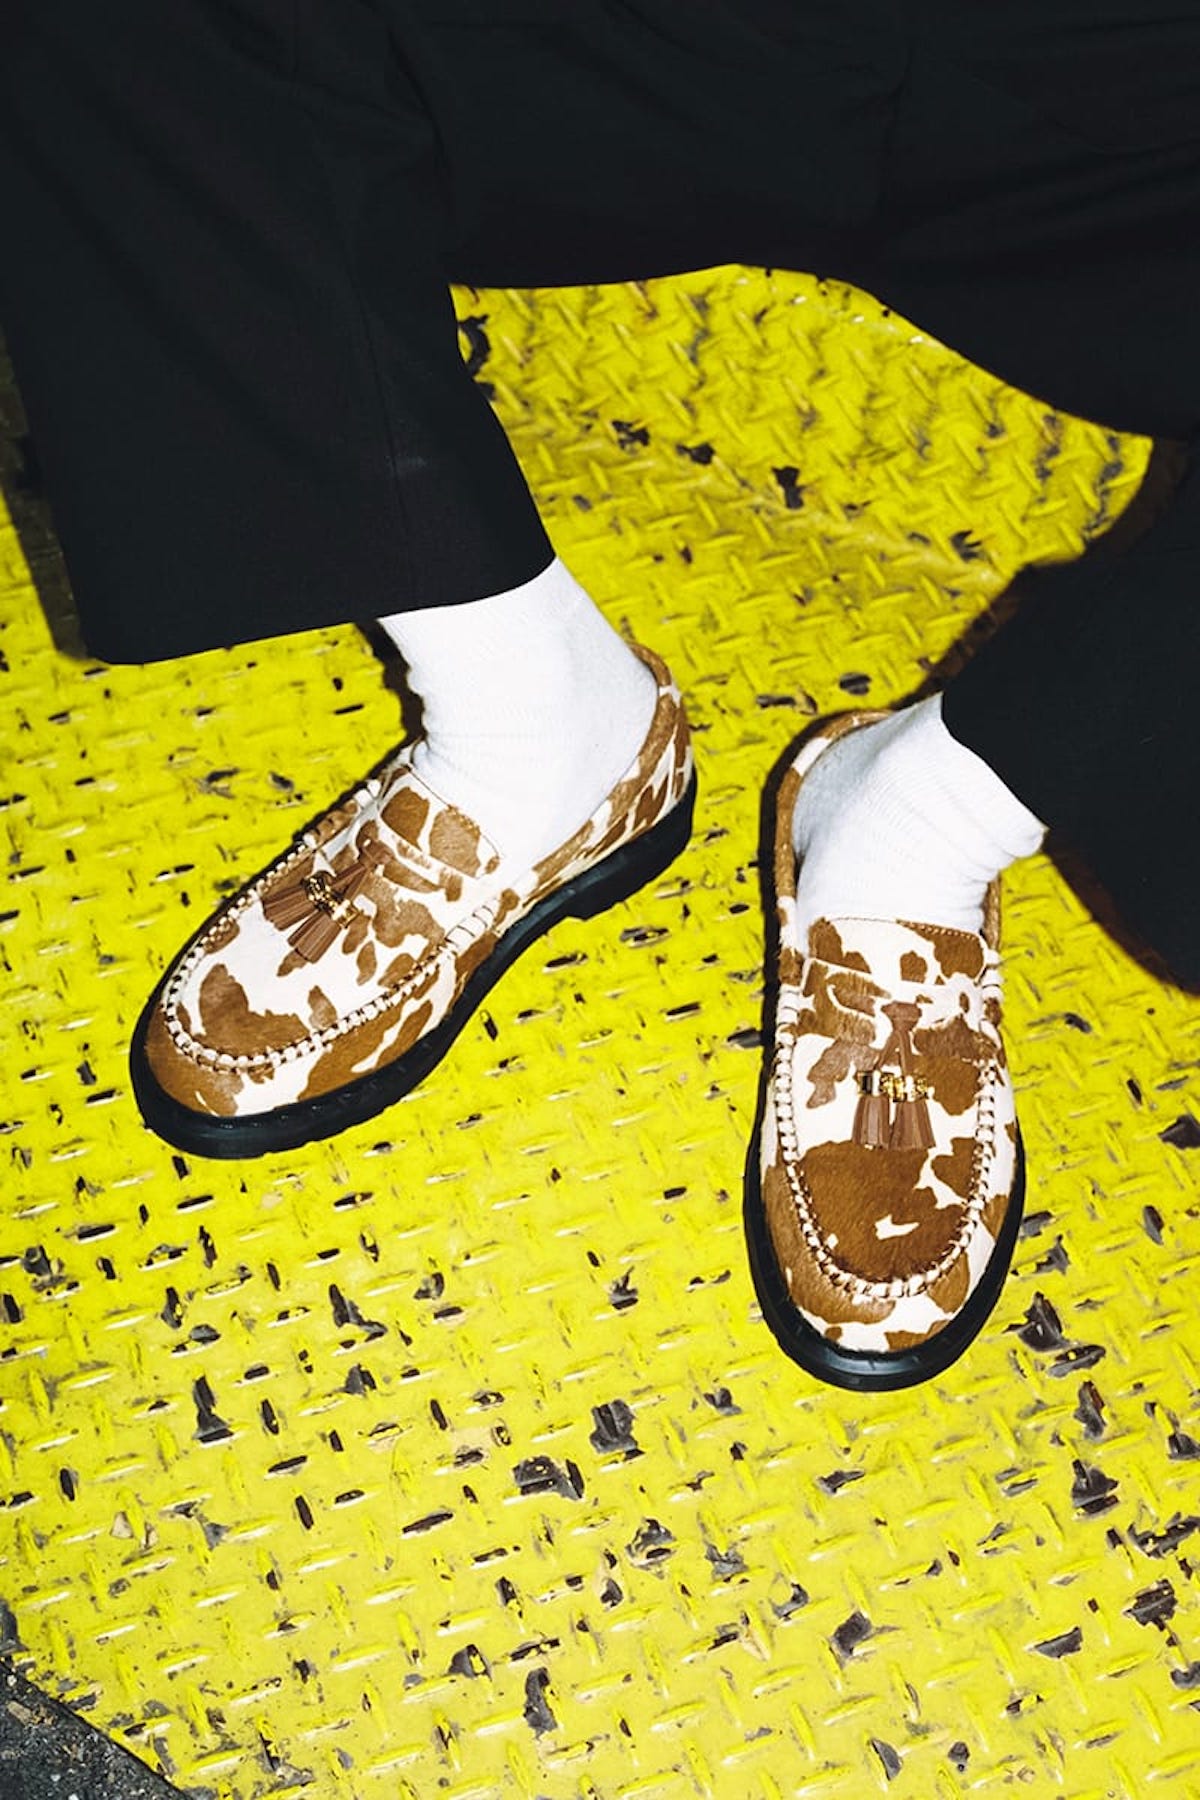 Celebrate Loafer Season with Supreme x Dr. Martens – PAUSE Online